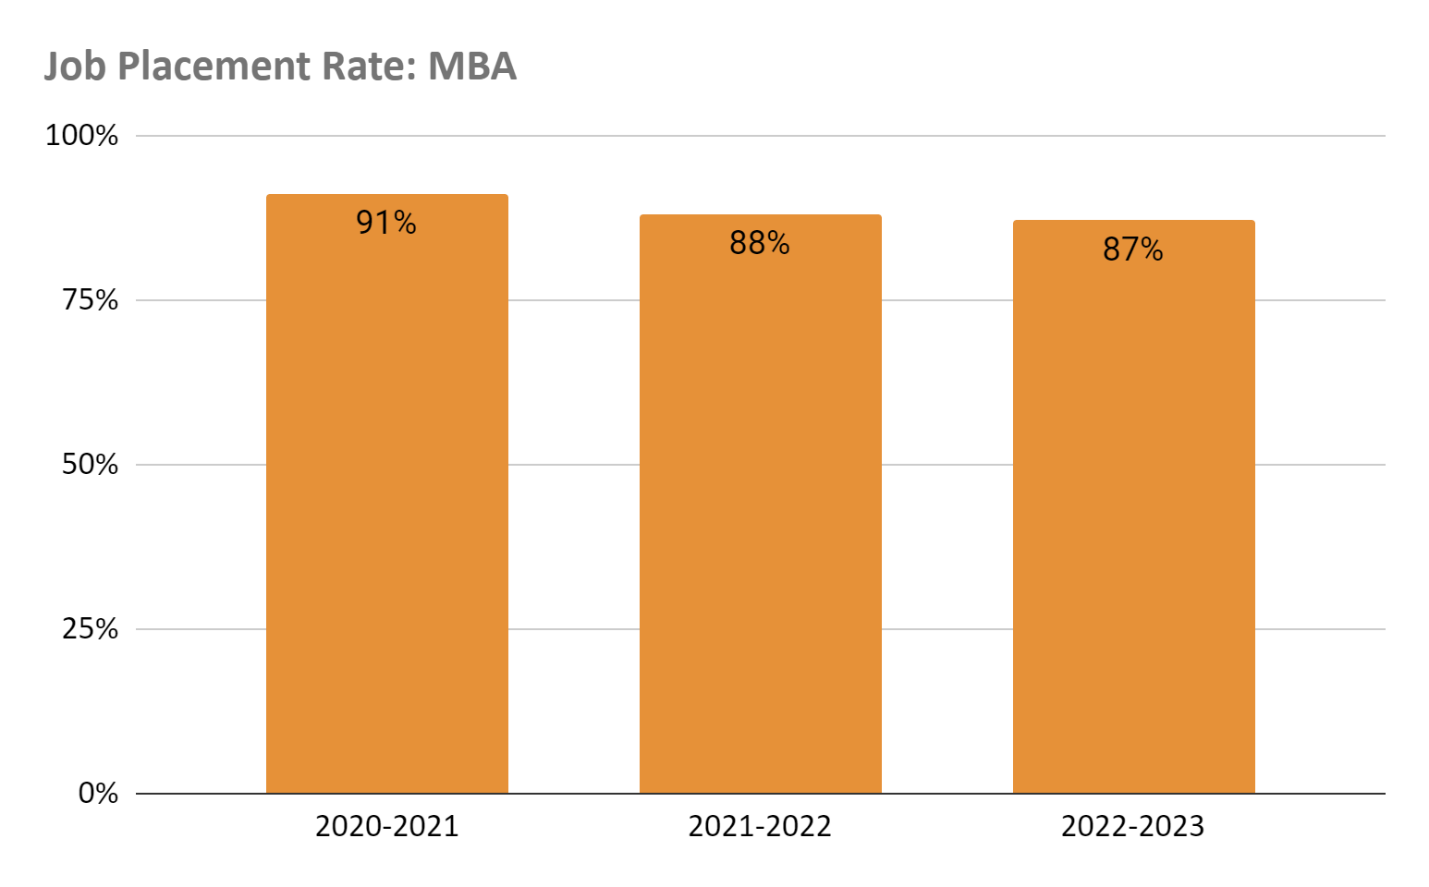 MBA job placement rate